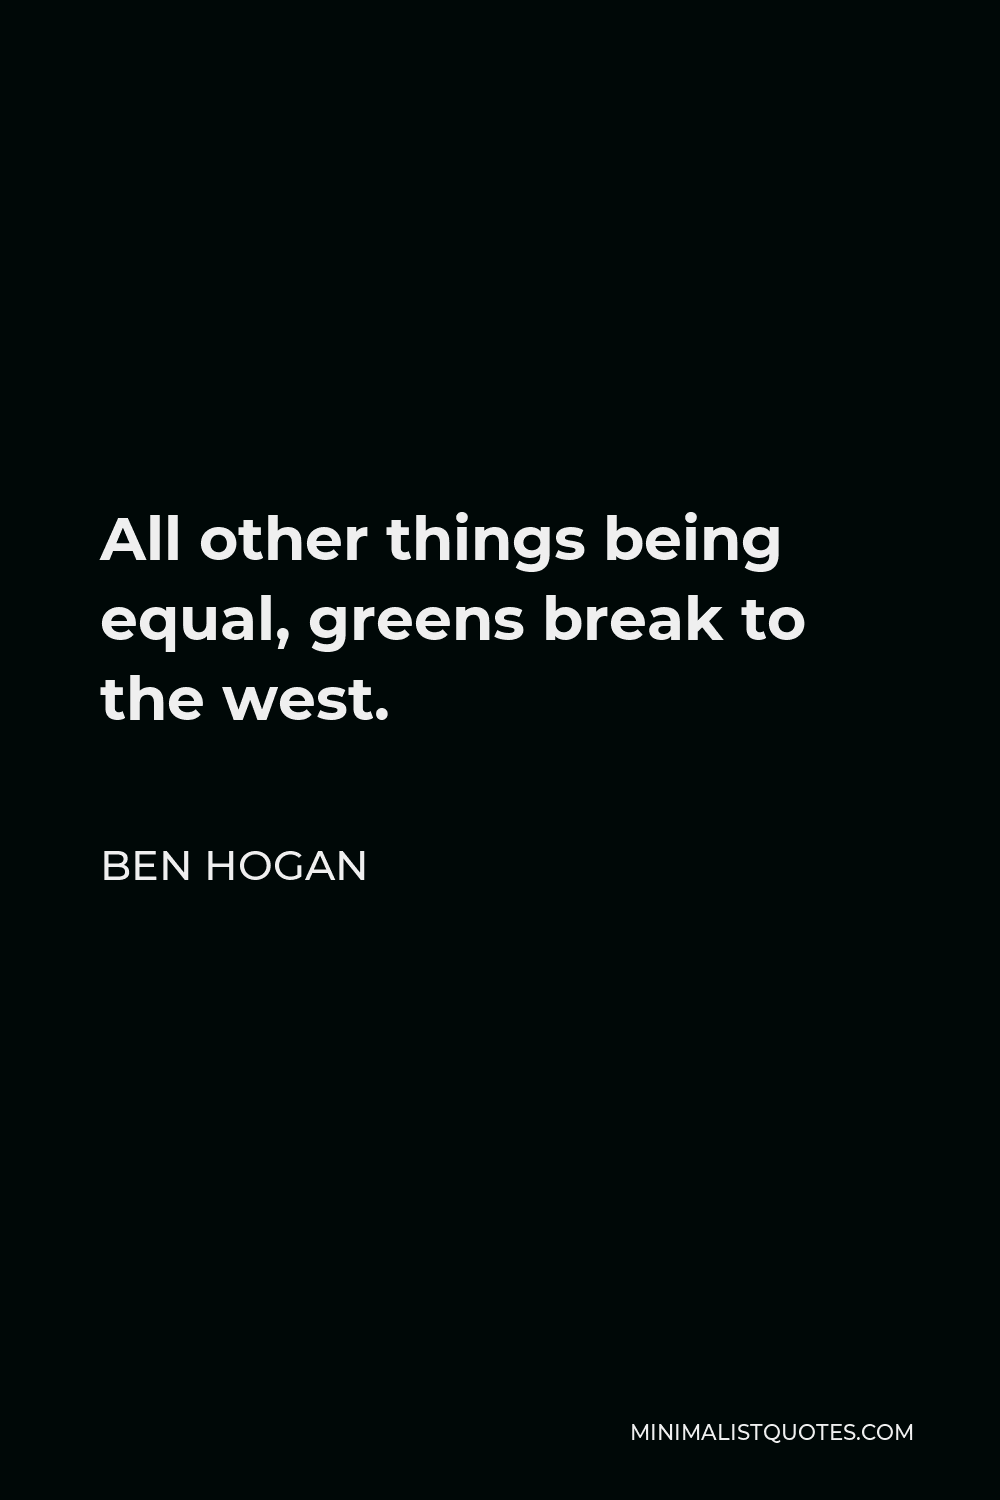 Ben Hogan Quote - All other things being equal, greens break to the west.